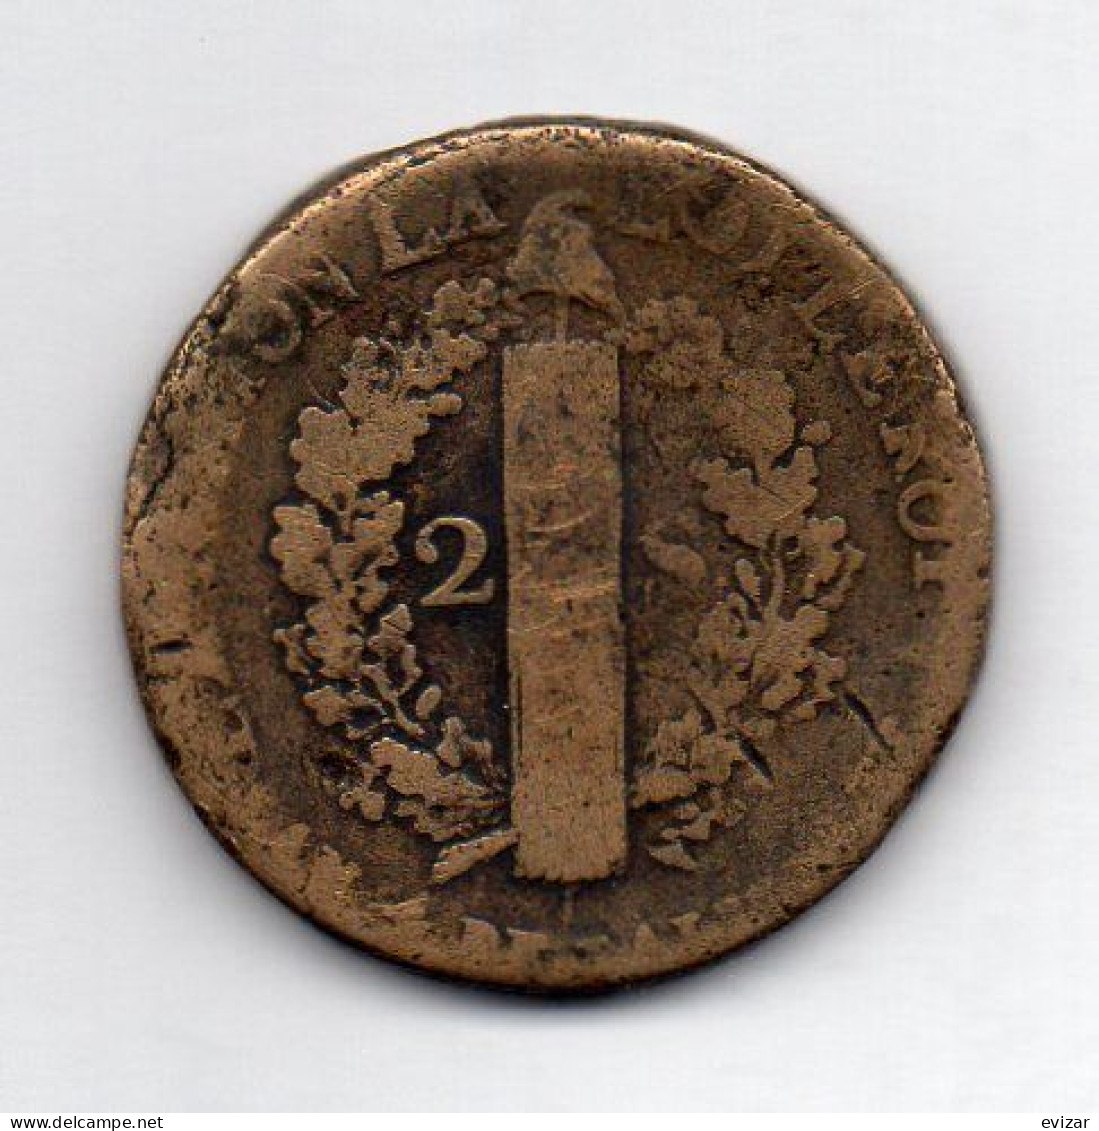 FRANCE, 2 Sols, Bronze, Year 1792-W (L' An 4), KM # C89.10 - 1792-1975 National Convention